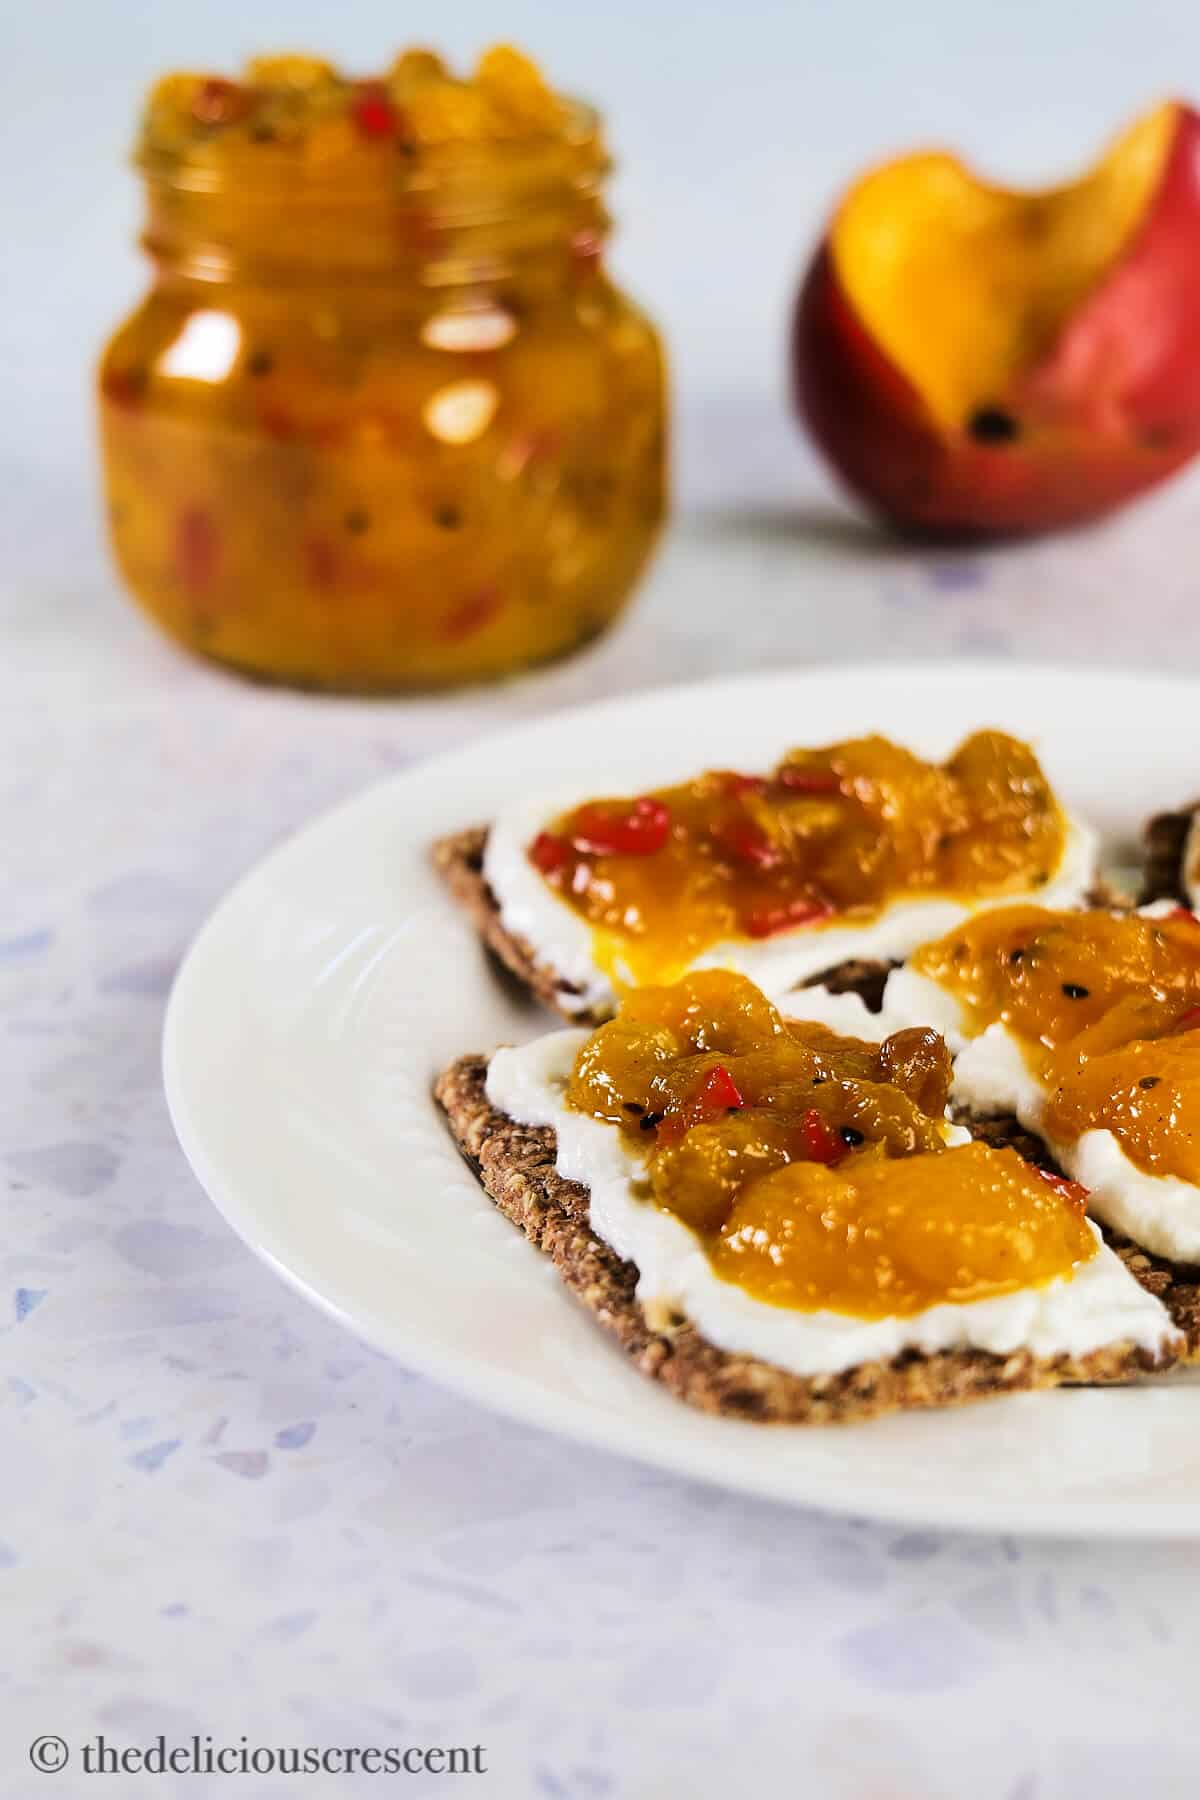 Savory and spicy mango preserves in a bottle and on crackers.